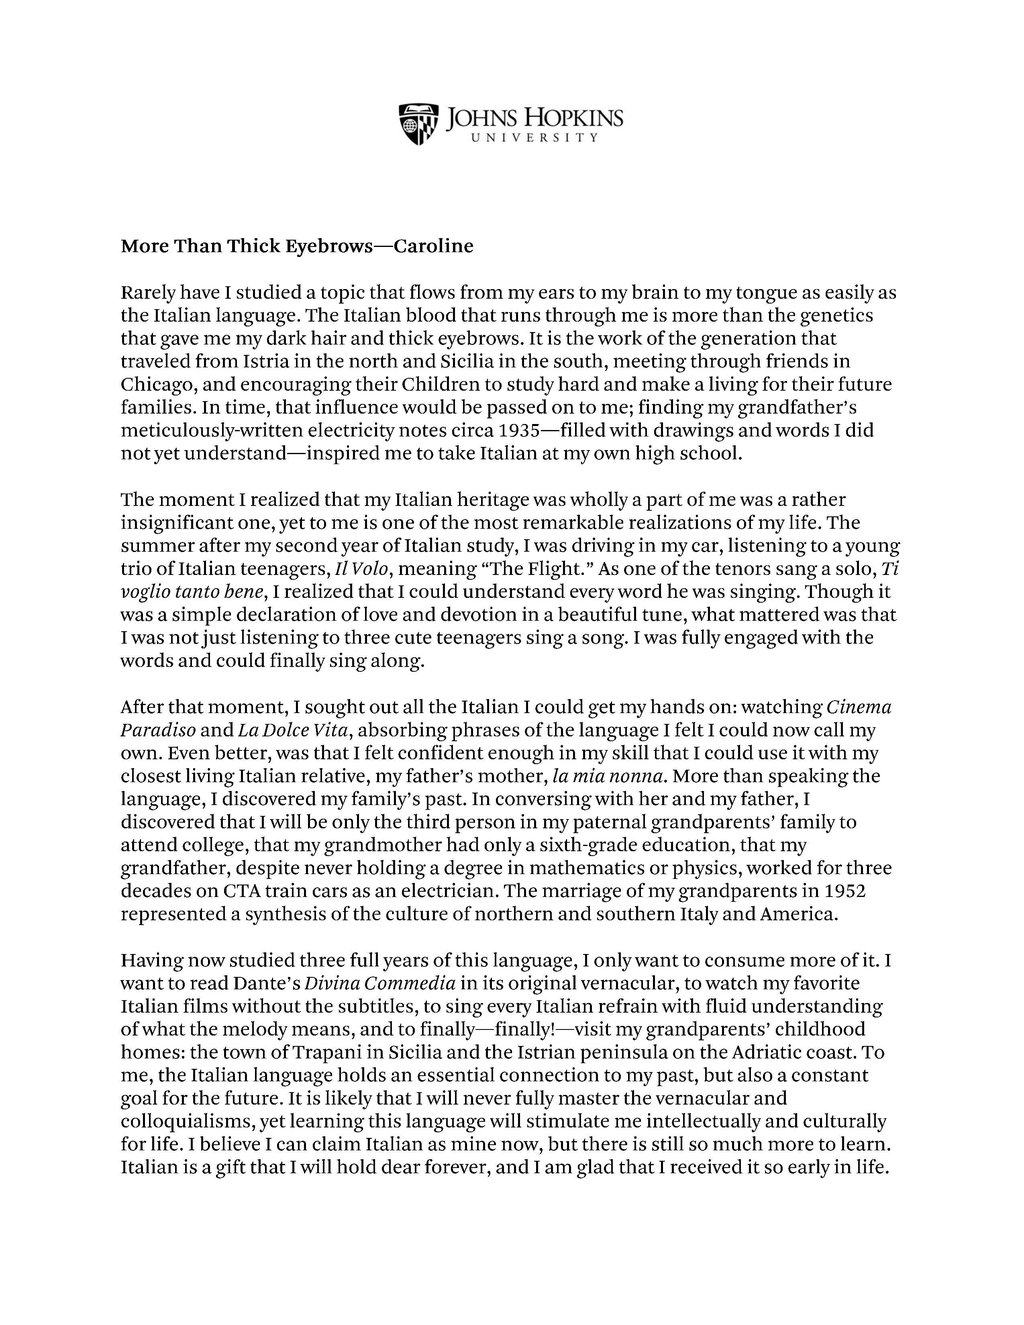 a college application essay sample